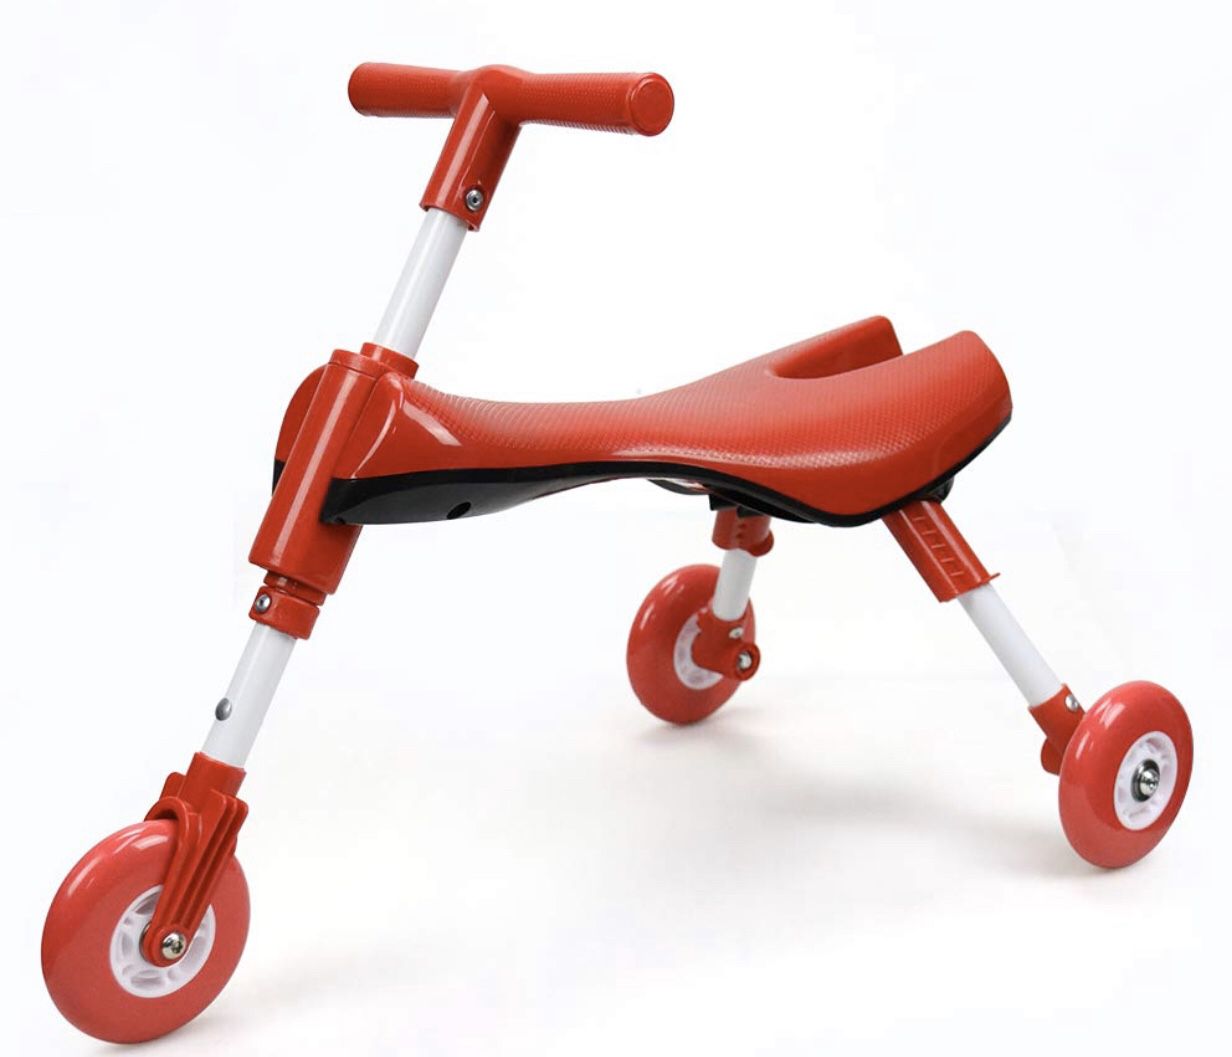 Medog Fly Bike Scooter Bug Foldable Toddlers Glide Ride On Toy -- Non Scratch